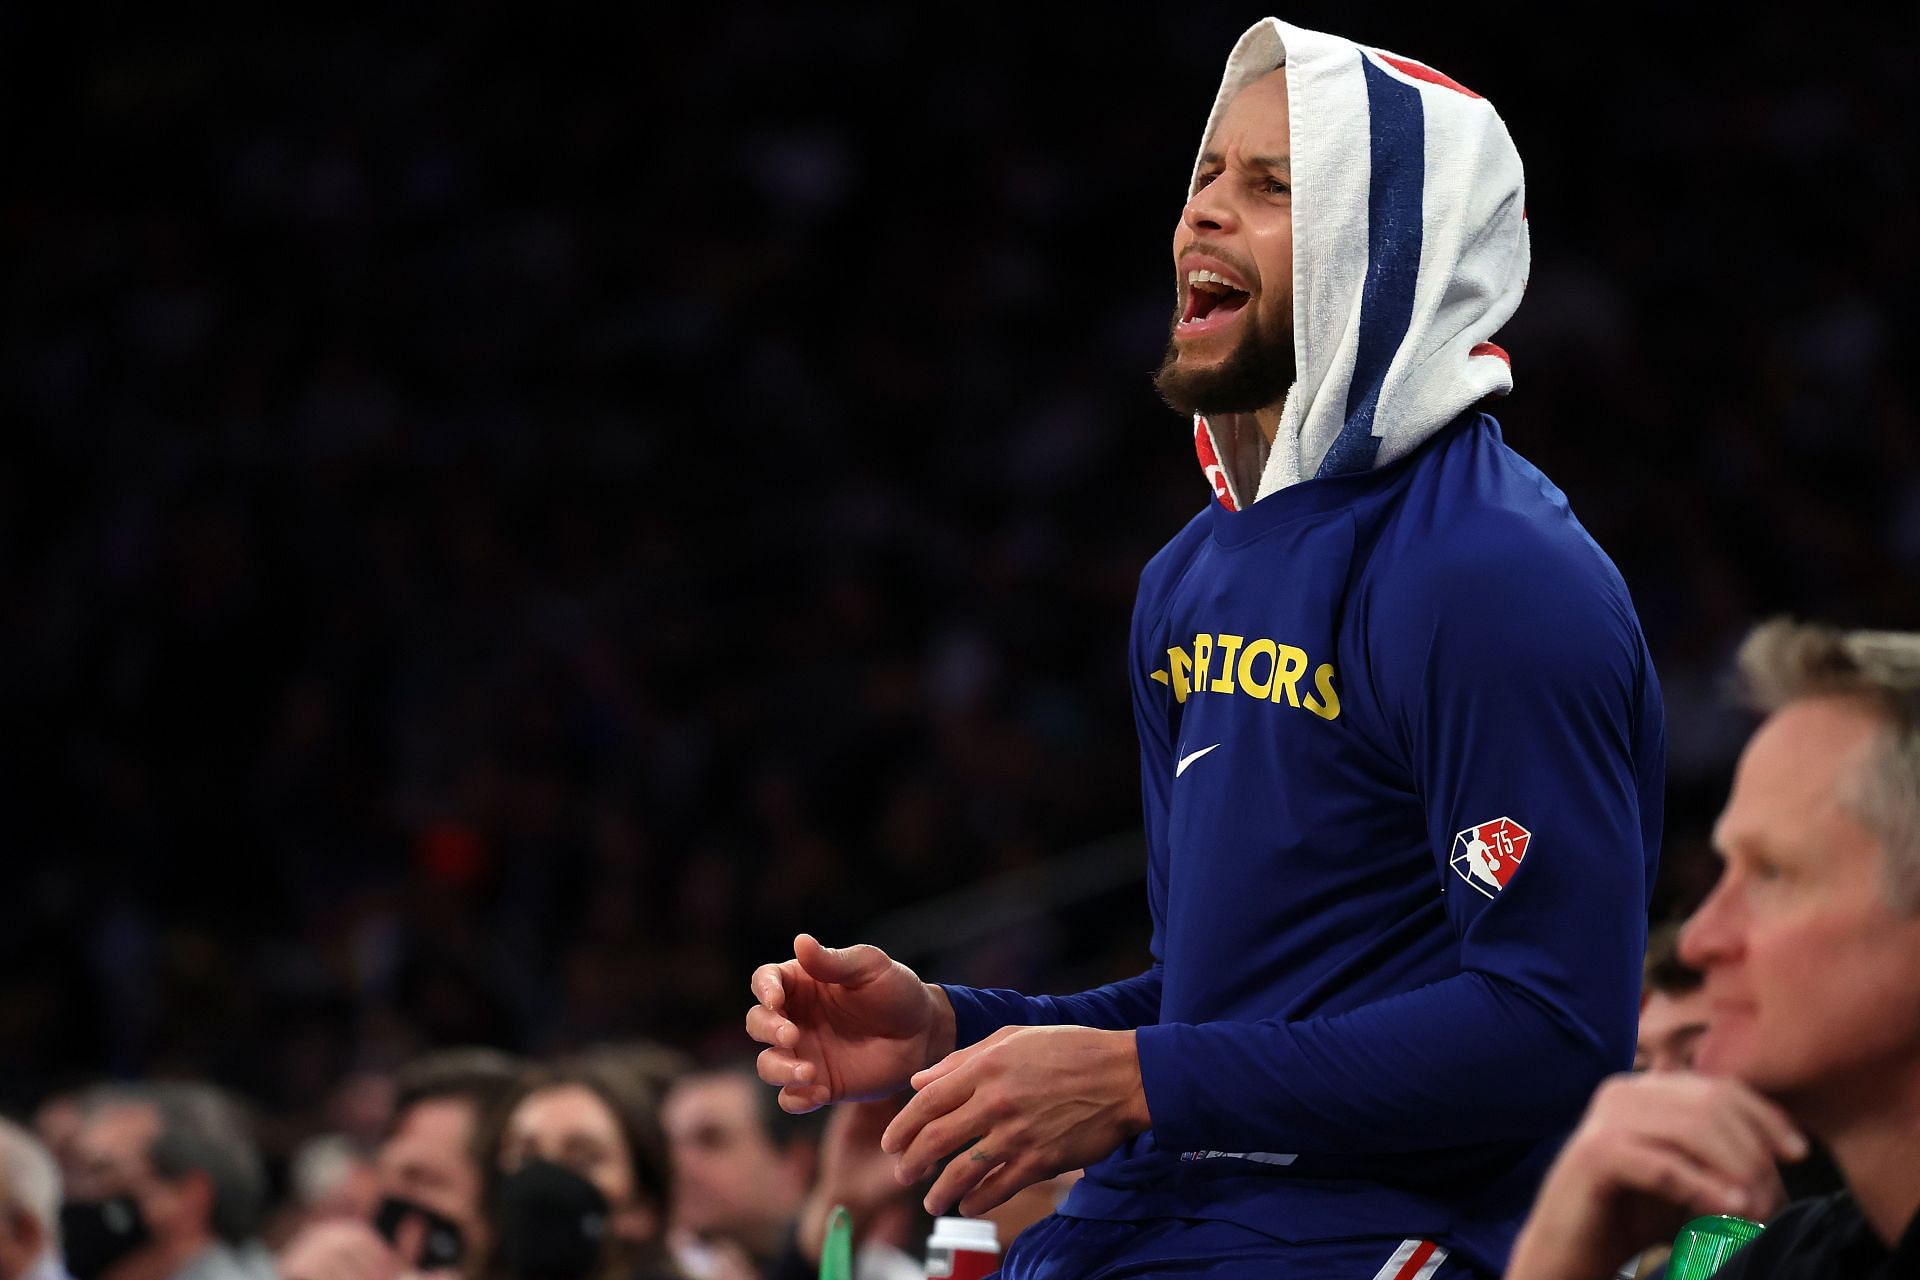 Stephen Curry cheers as Golden State played the New York Knicks on Dec. 14 in New York City.